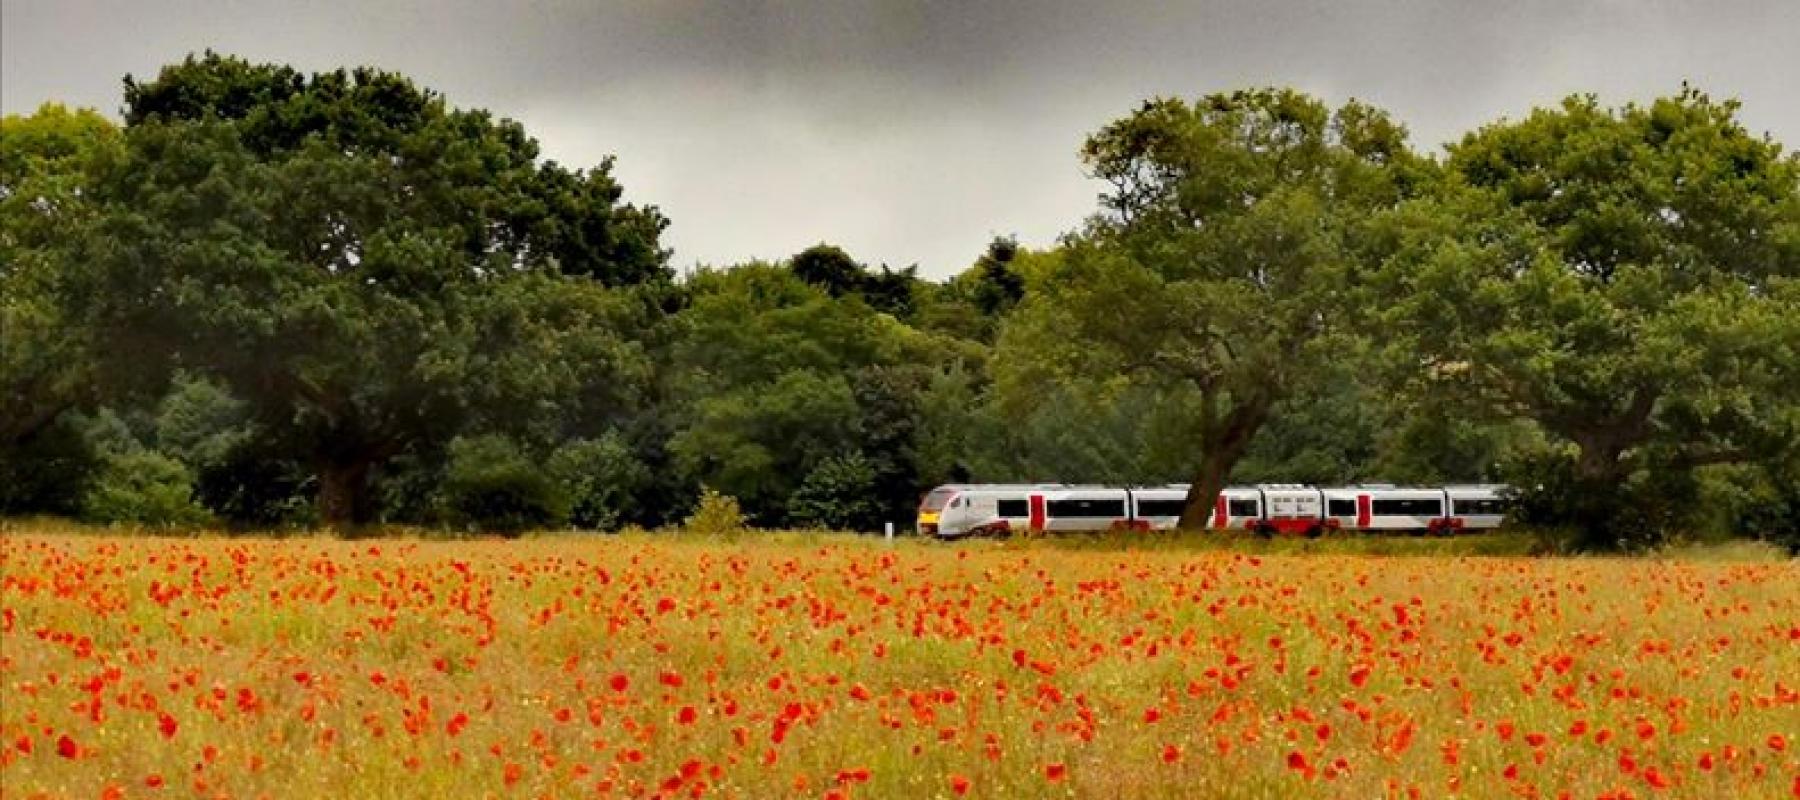 Greater Anglia train travelling through field